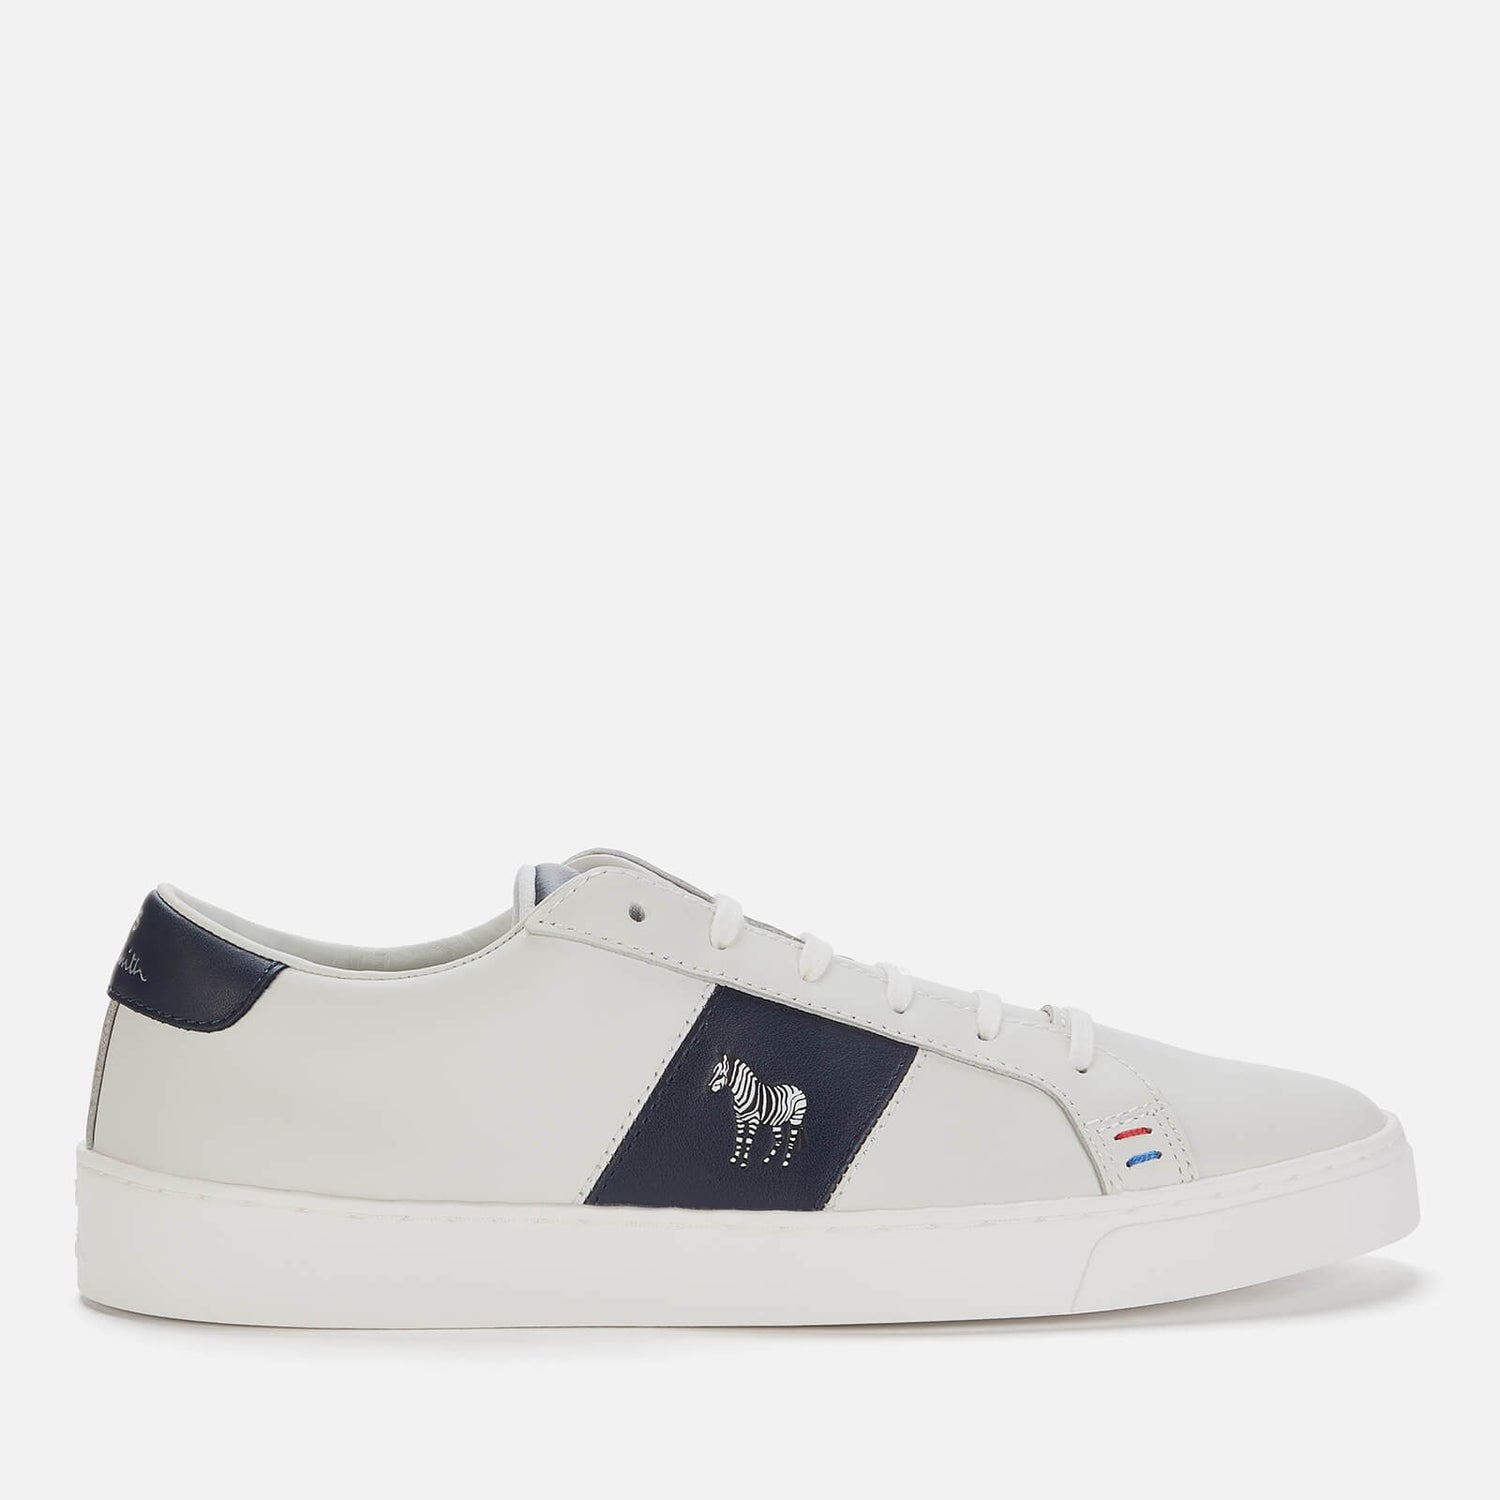 PS Paul Smith Men's Zach Leather Cupsole Trainers - White/Dark Navy ...